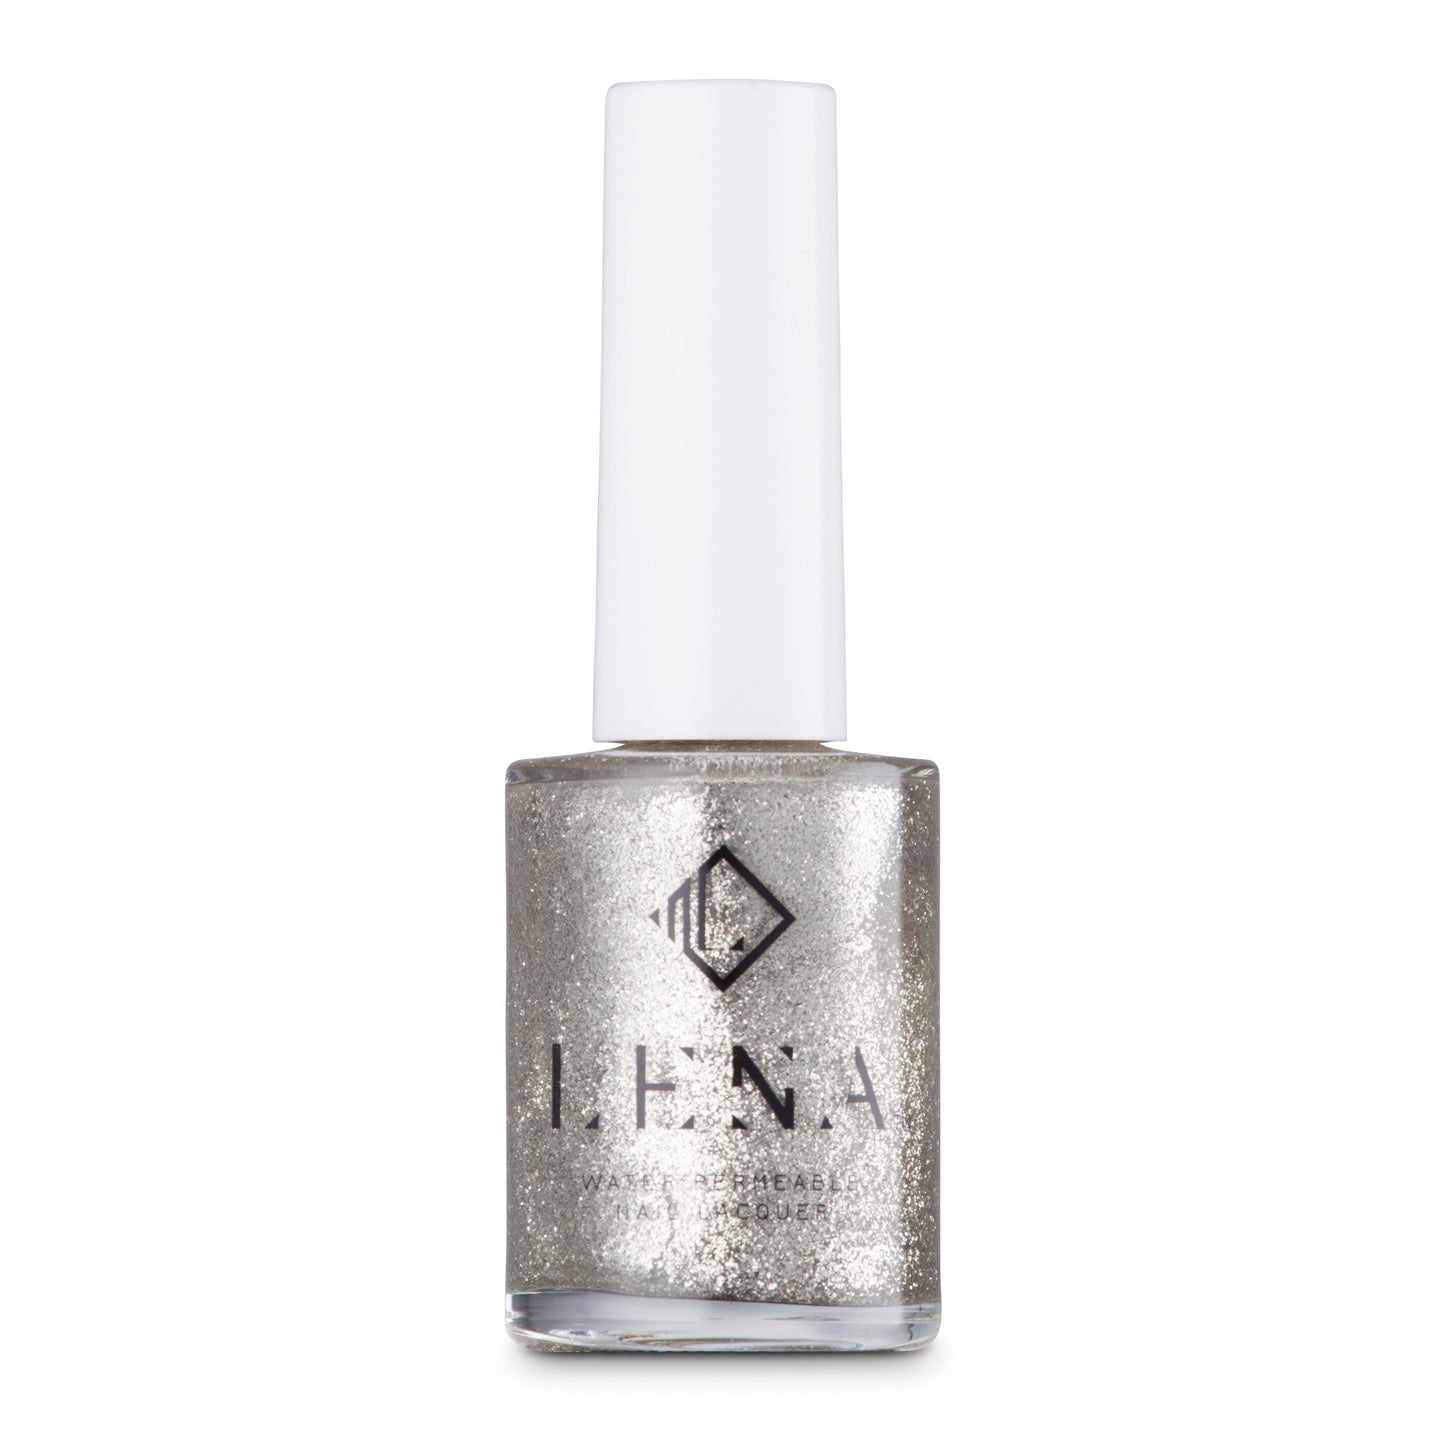 Breathable_Halal_Nail_Polish_Fit_for_a_Queen_LE164_LENA